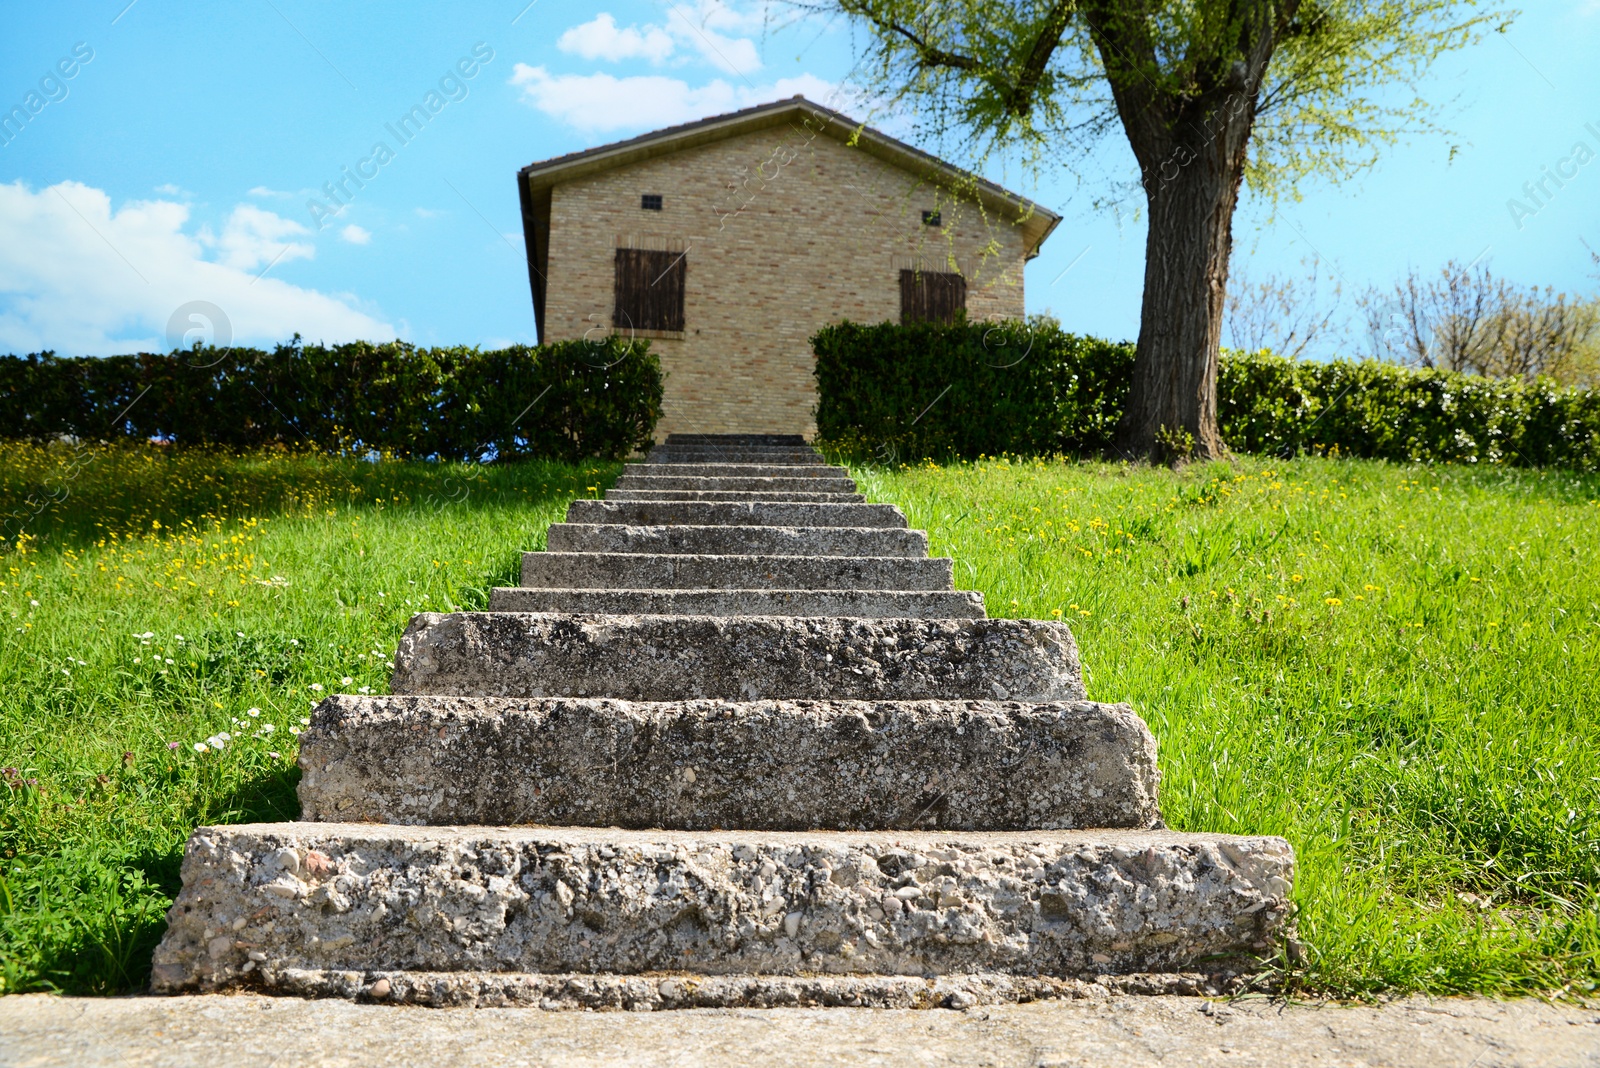 Photo of Stone stairs leading to house outdoors on sunny day